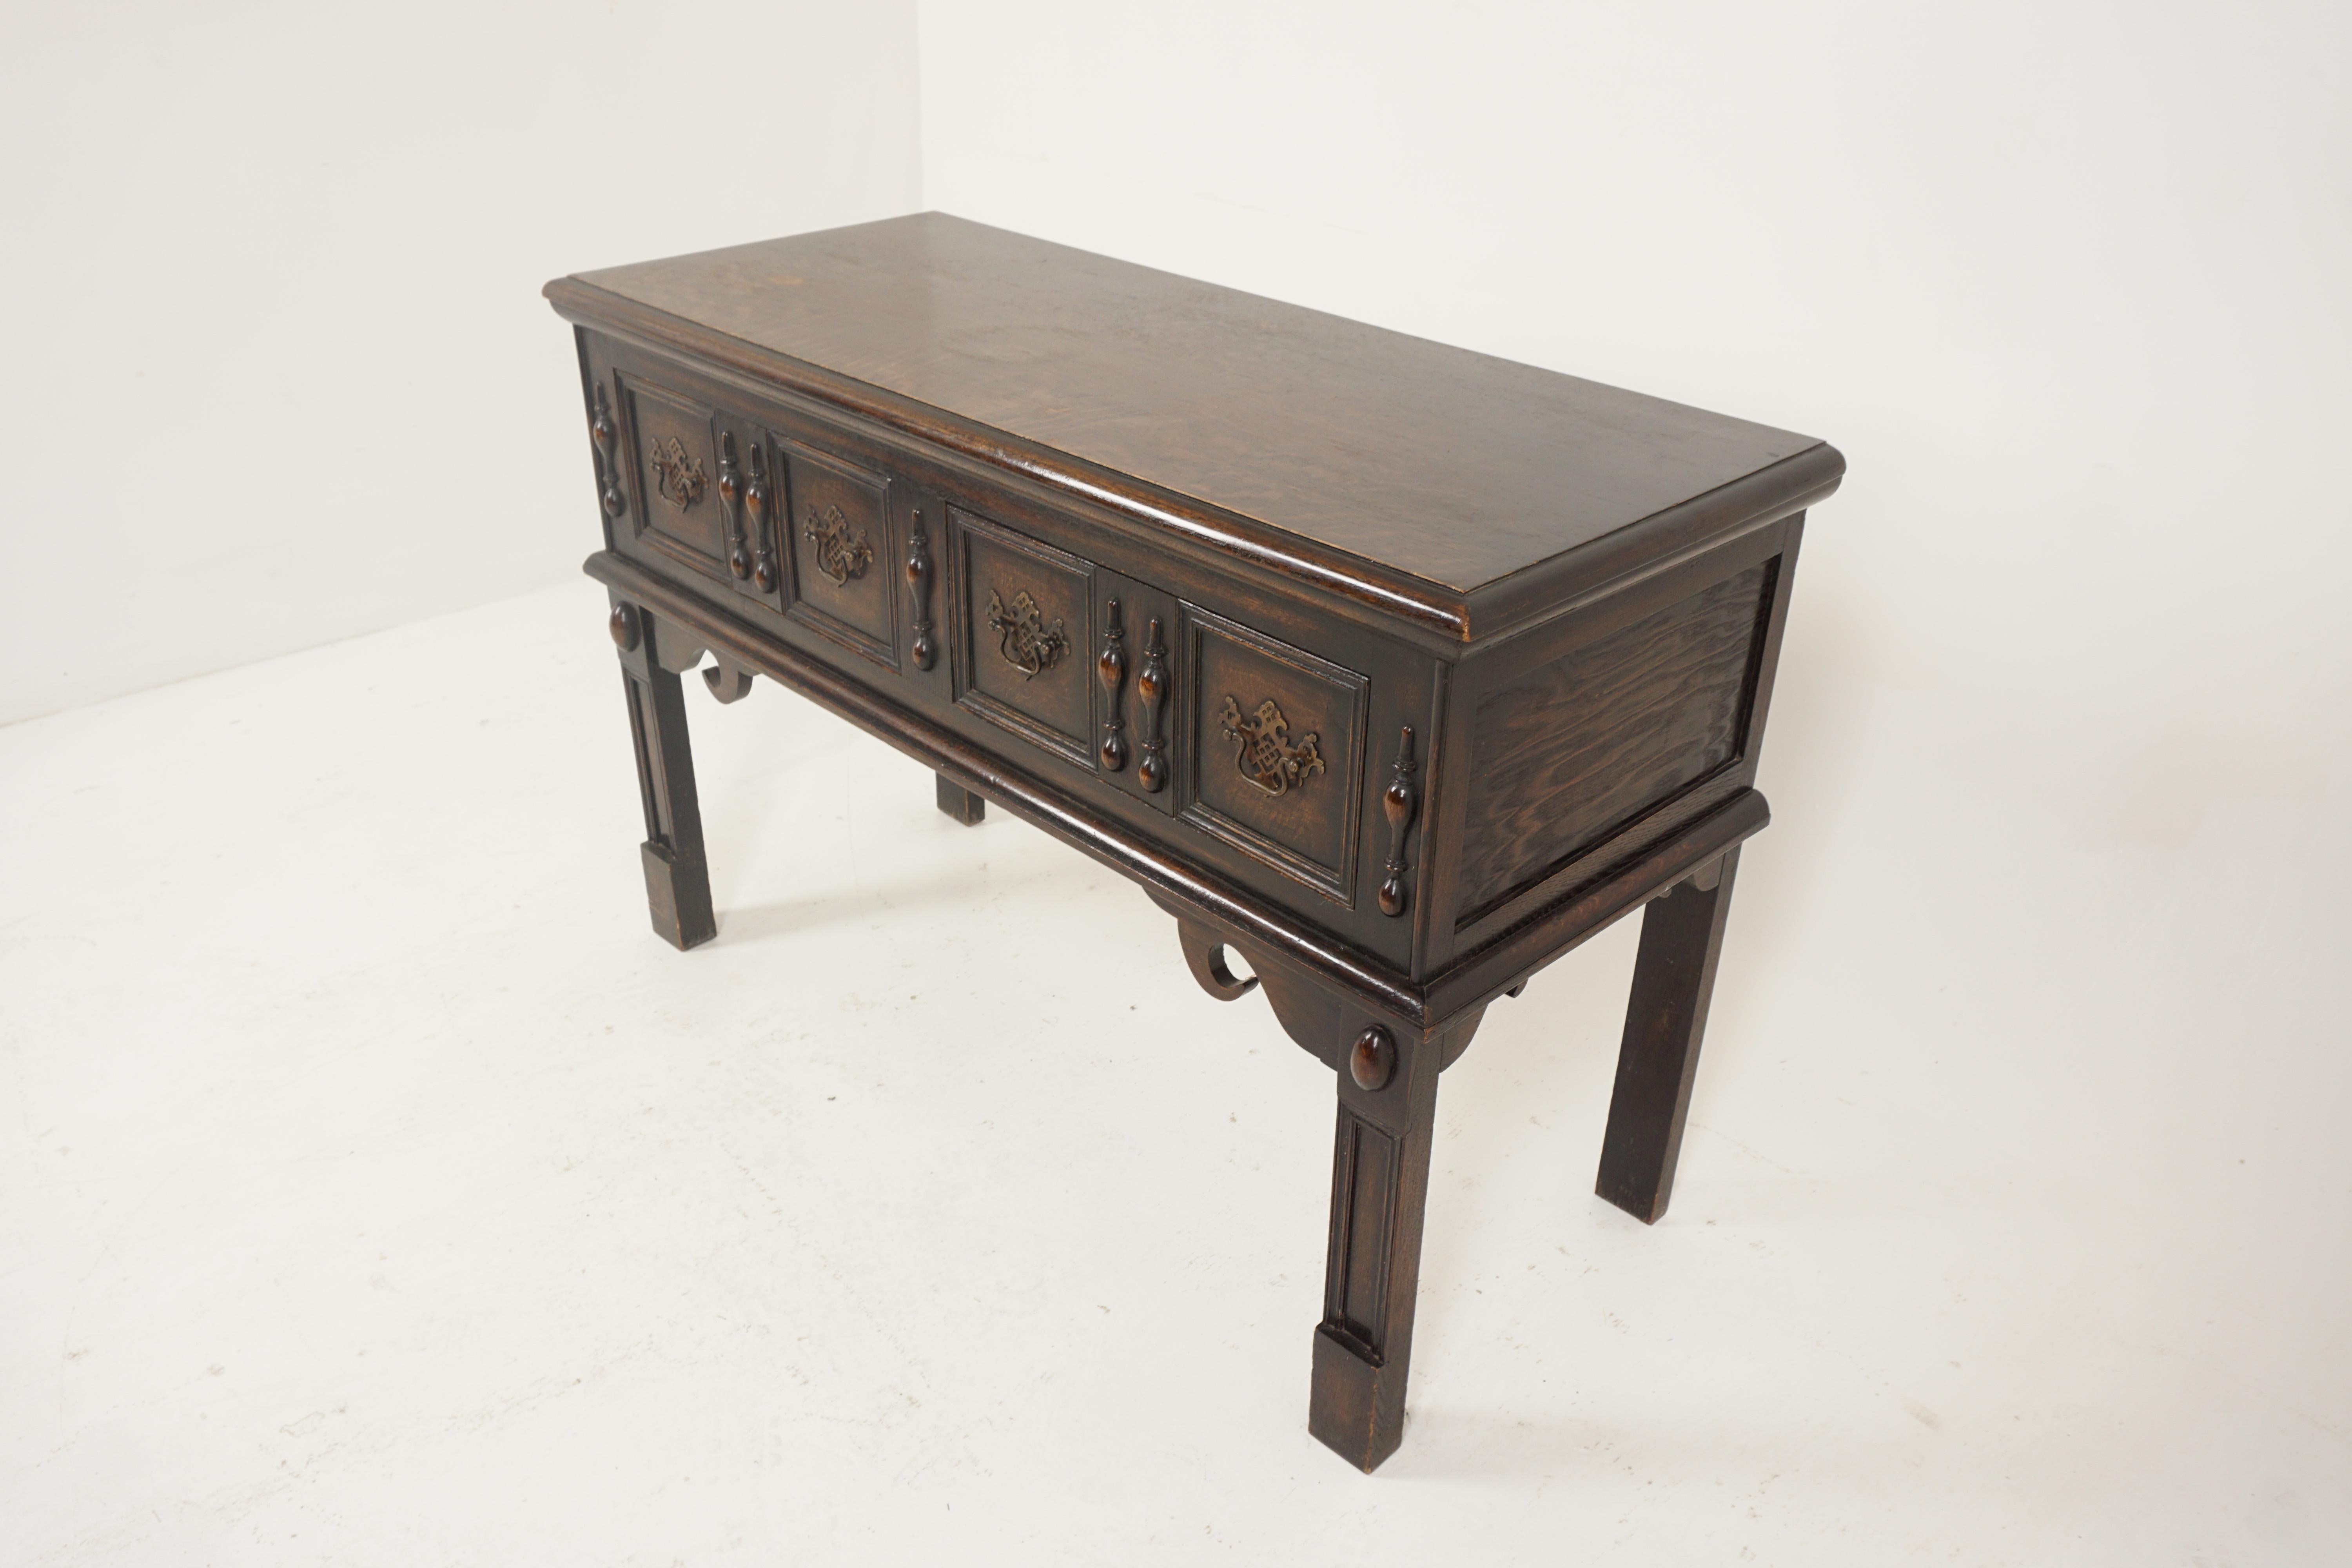 Antique oak serving table, sideboard, hall table dresser base, Scotland 1910, H240

Scotland 1910
Solid oak
Original finish
Rectangular top with moulded edge
Pair of paneled dovetailed drawers with applied mouldings to the front
All standing on tall